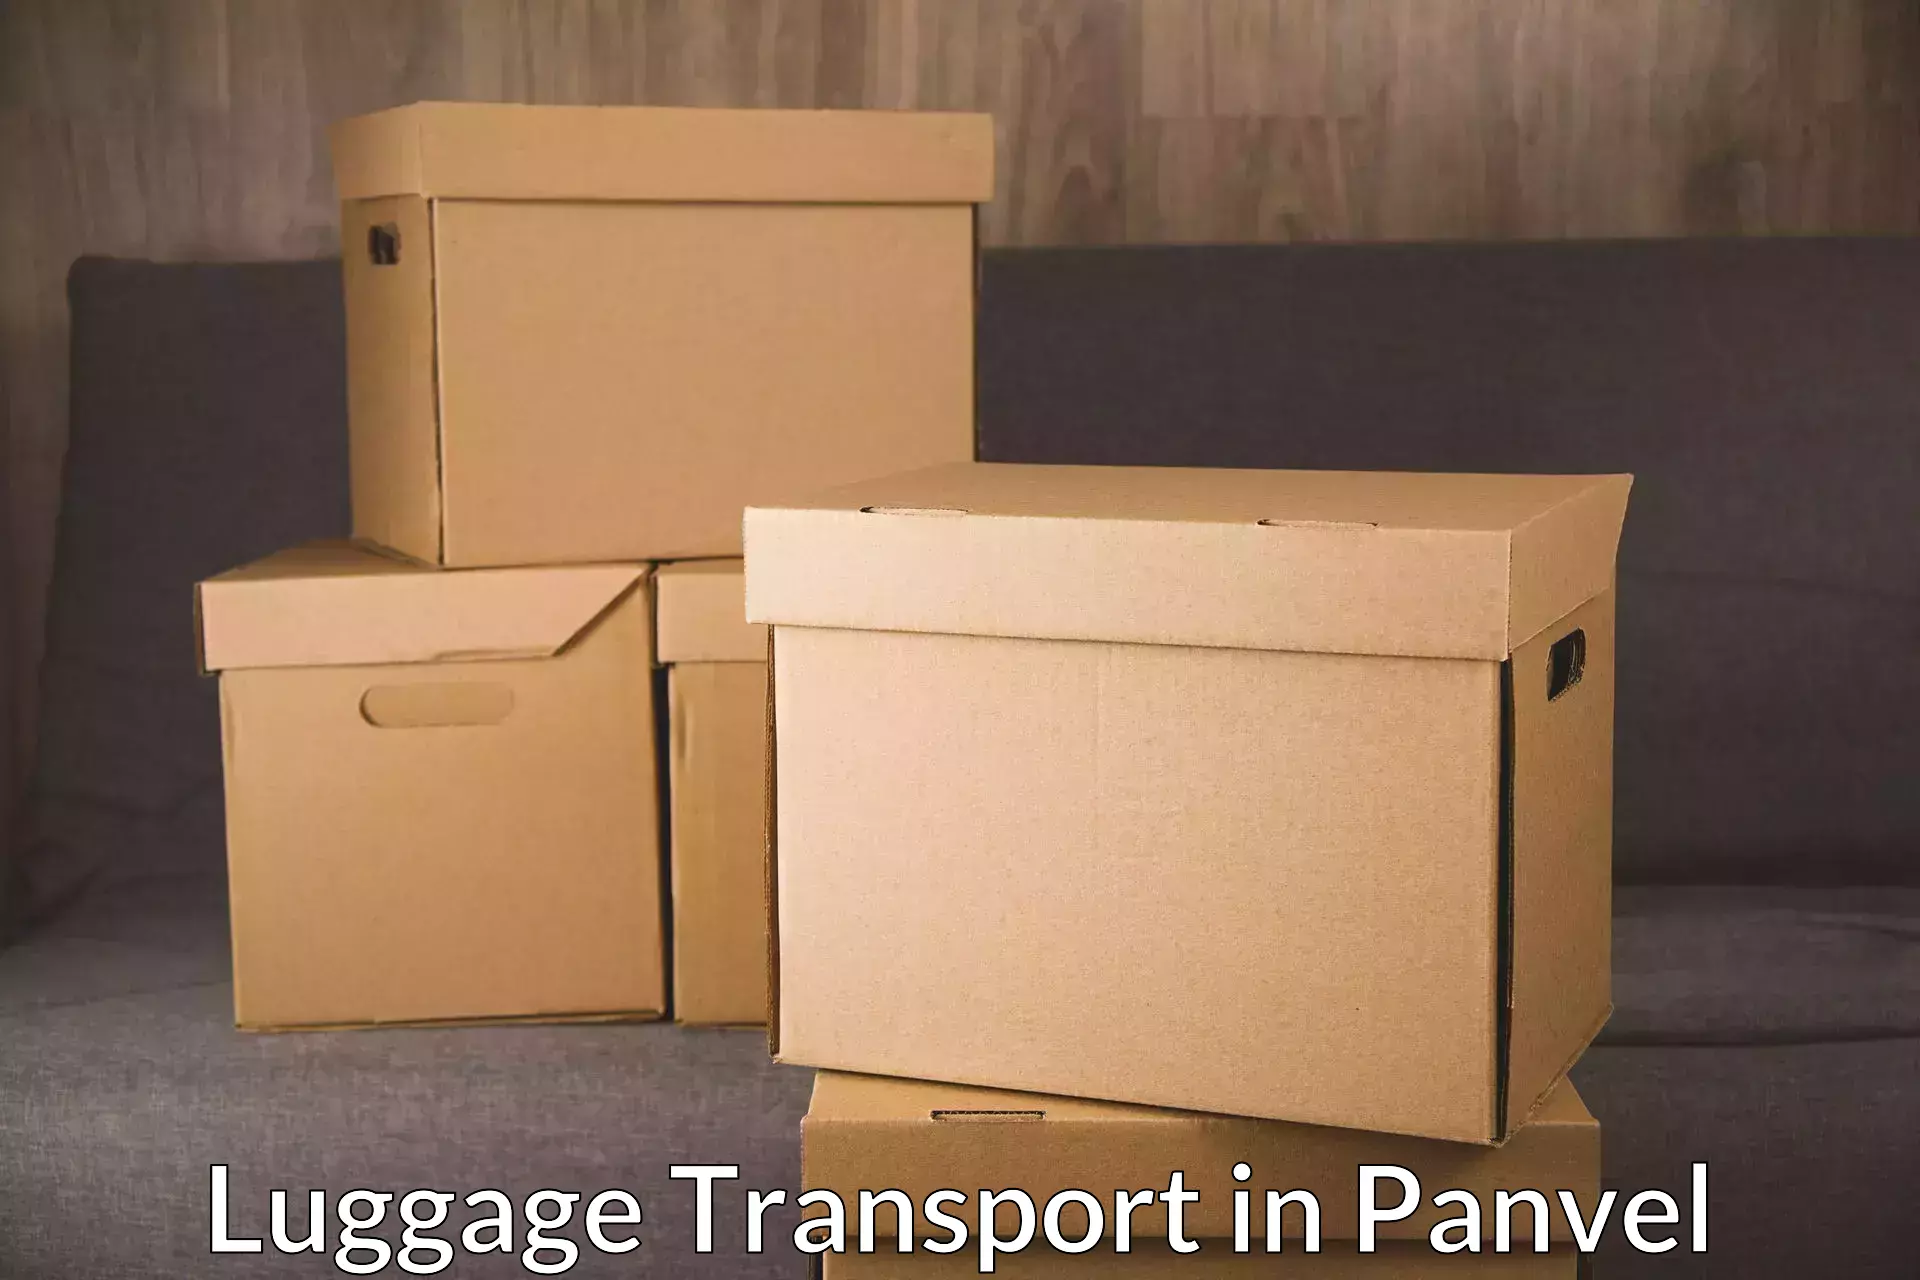 Baggage transport services in Panvel